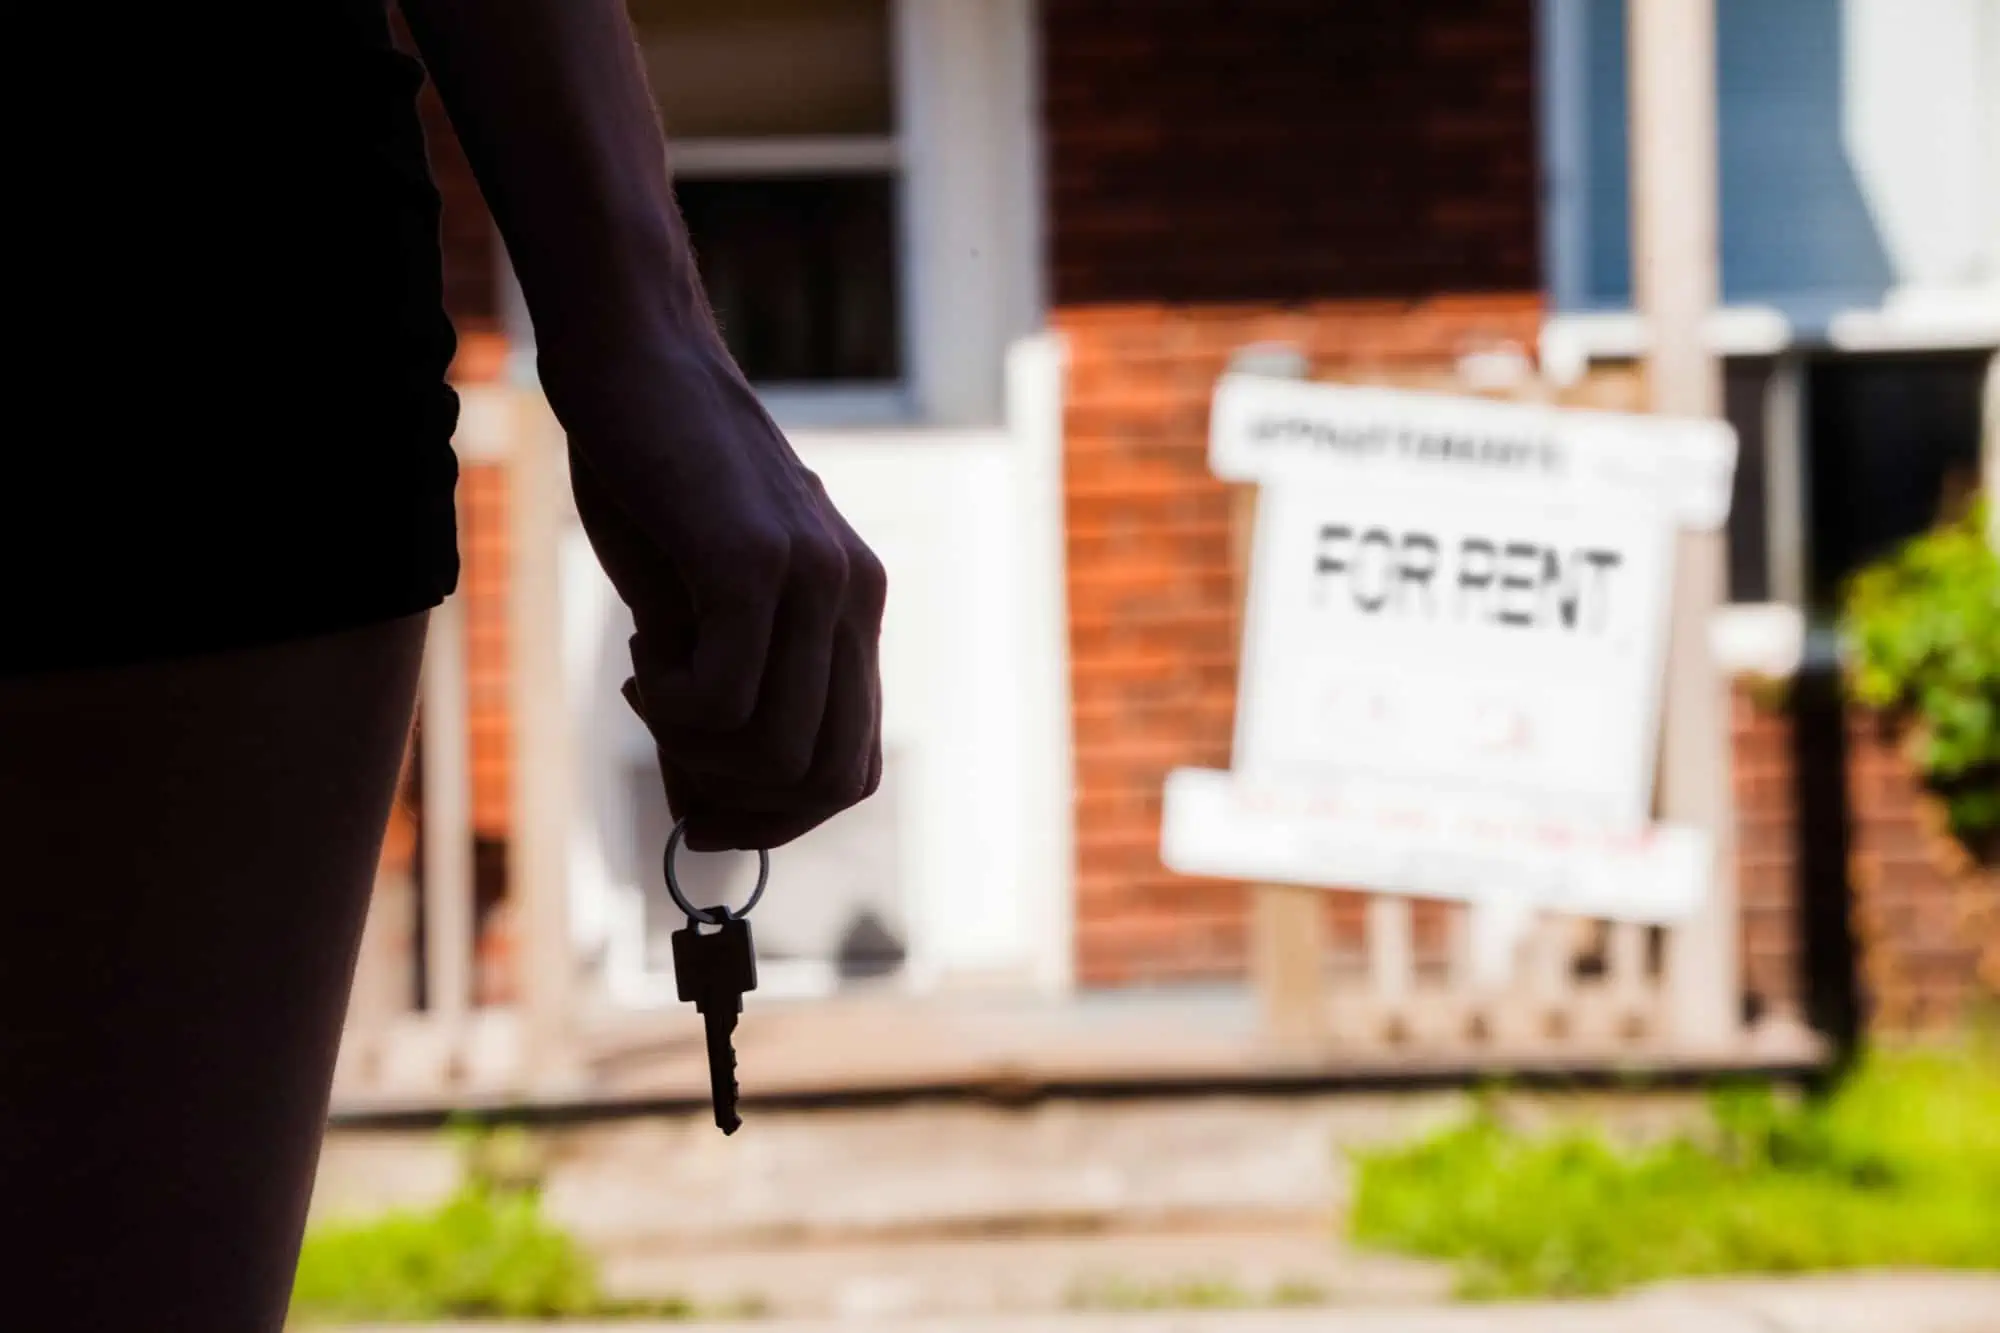 Caucasian woman holding keys to a house standing in front of a "for rent" sign in the front yard.